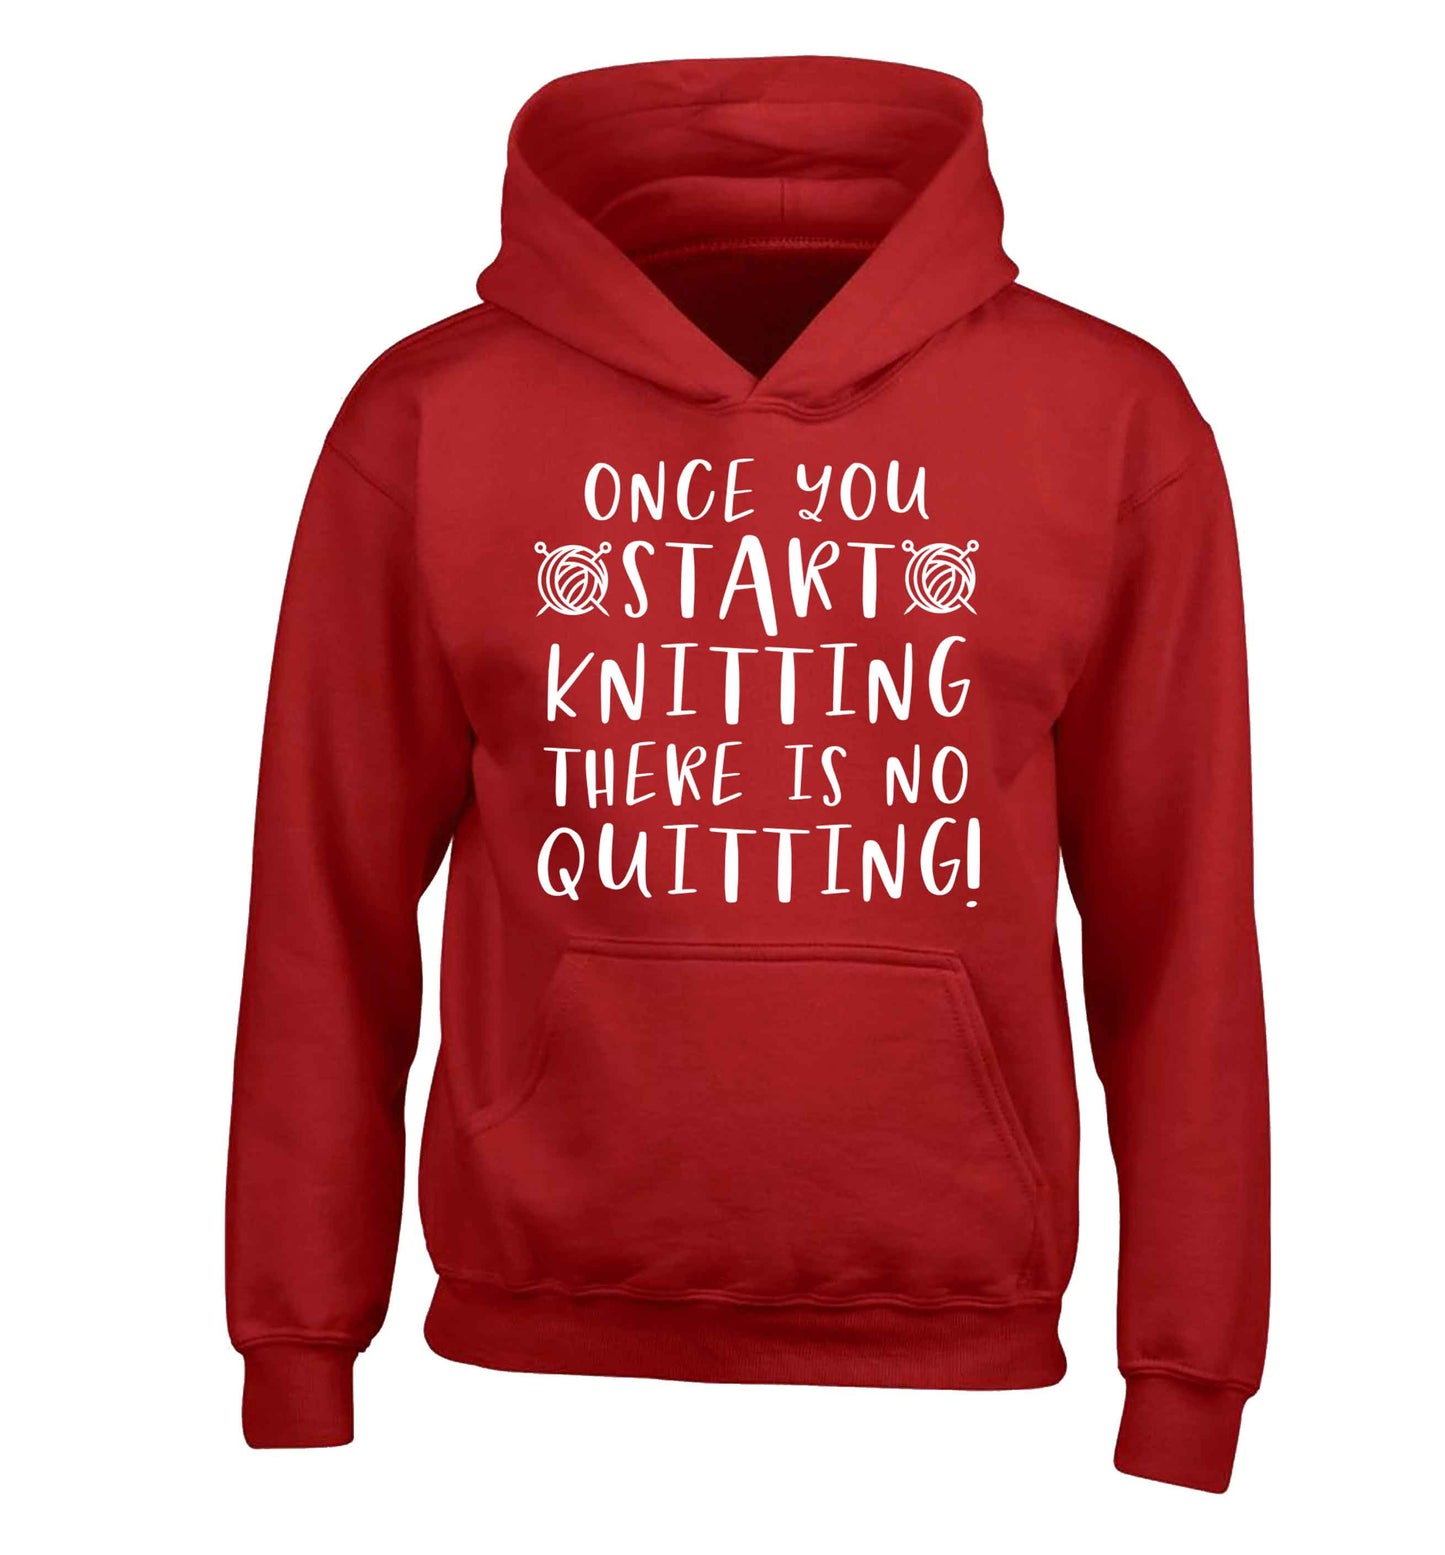 Once you start knitting there is no quitting! children's red hoodie 12-13 Years